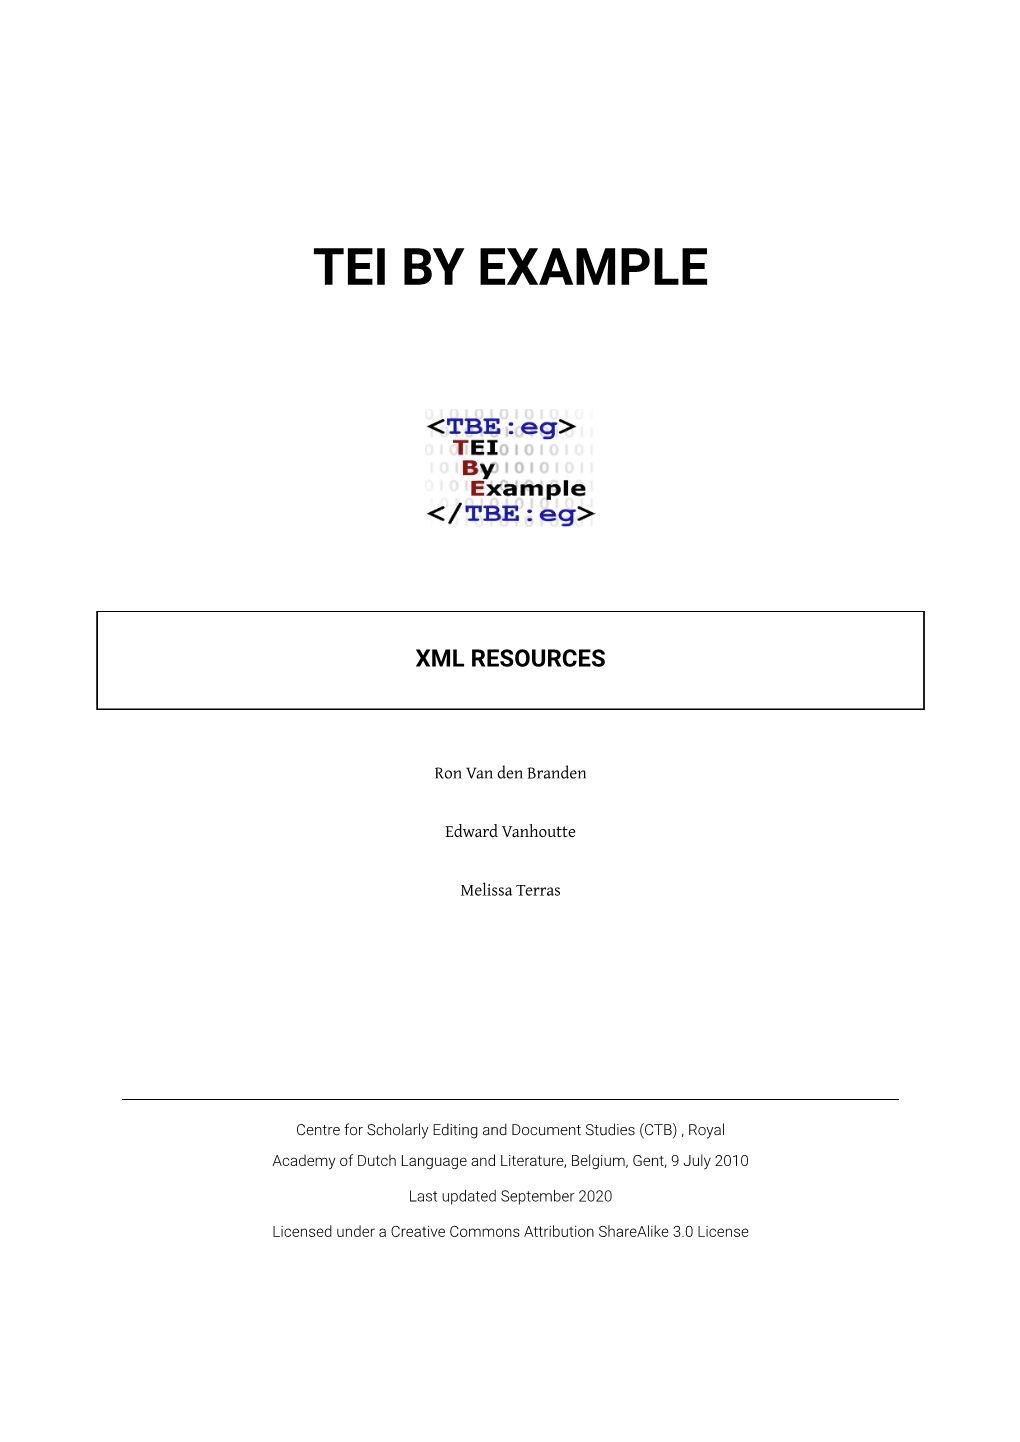 Tei by Example